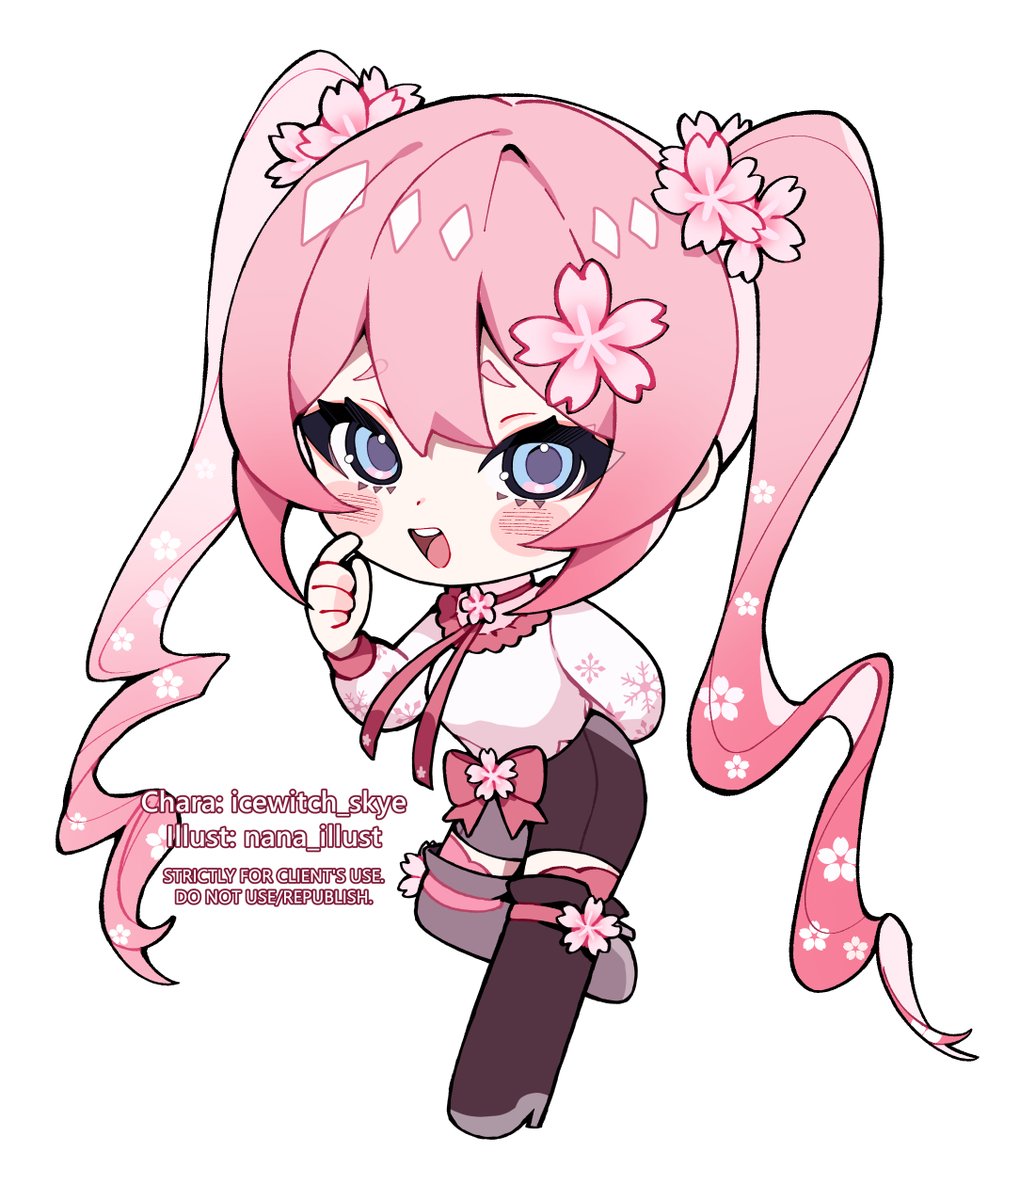 「Been a while since I did Chibi 」|Nana 🌸のイラスト